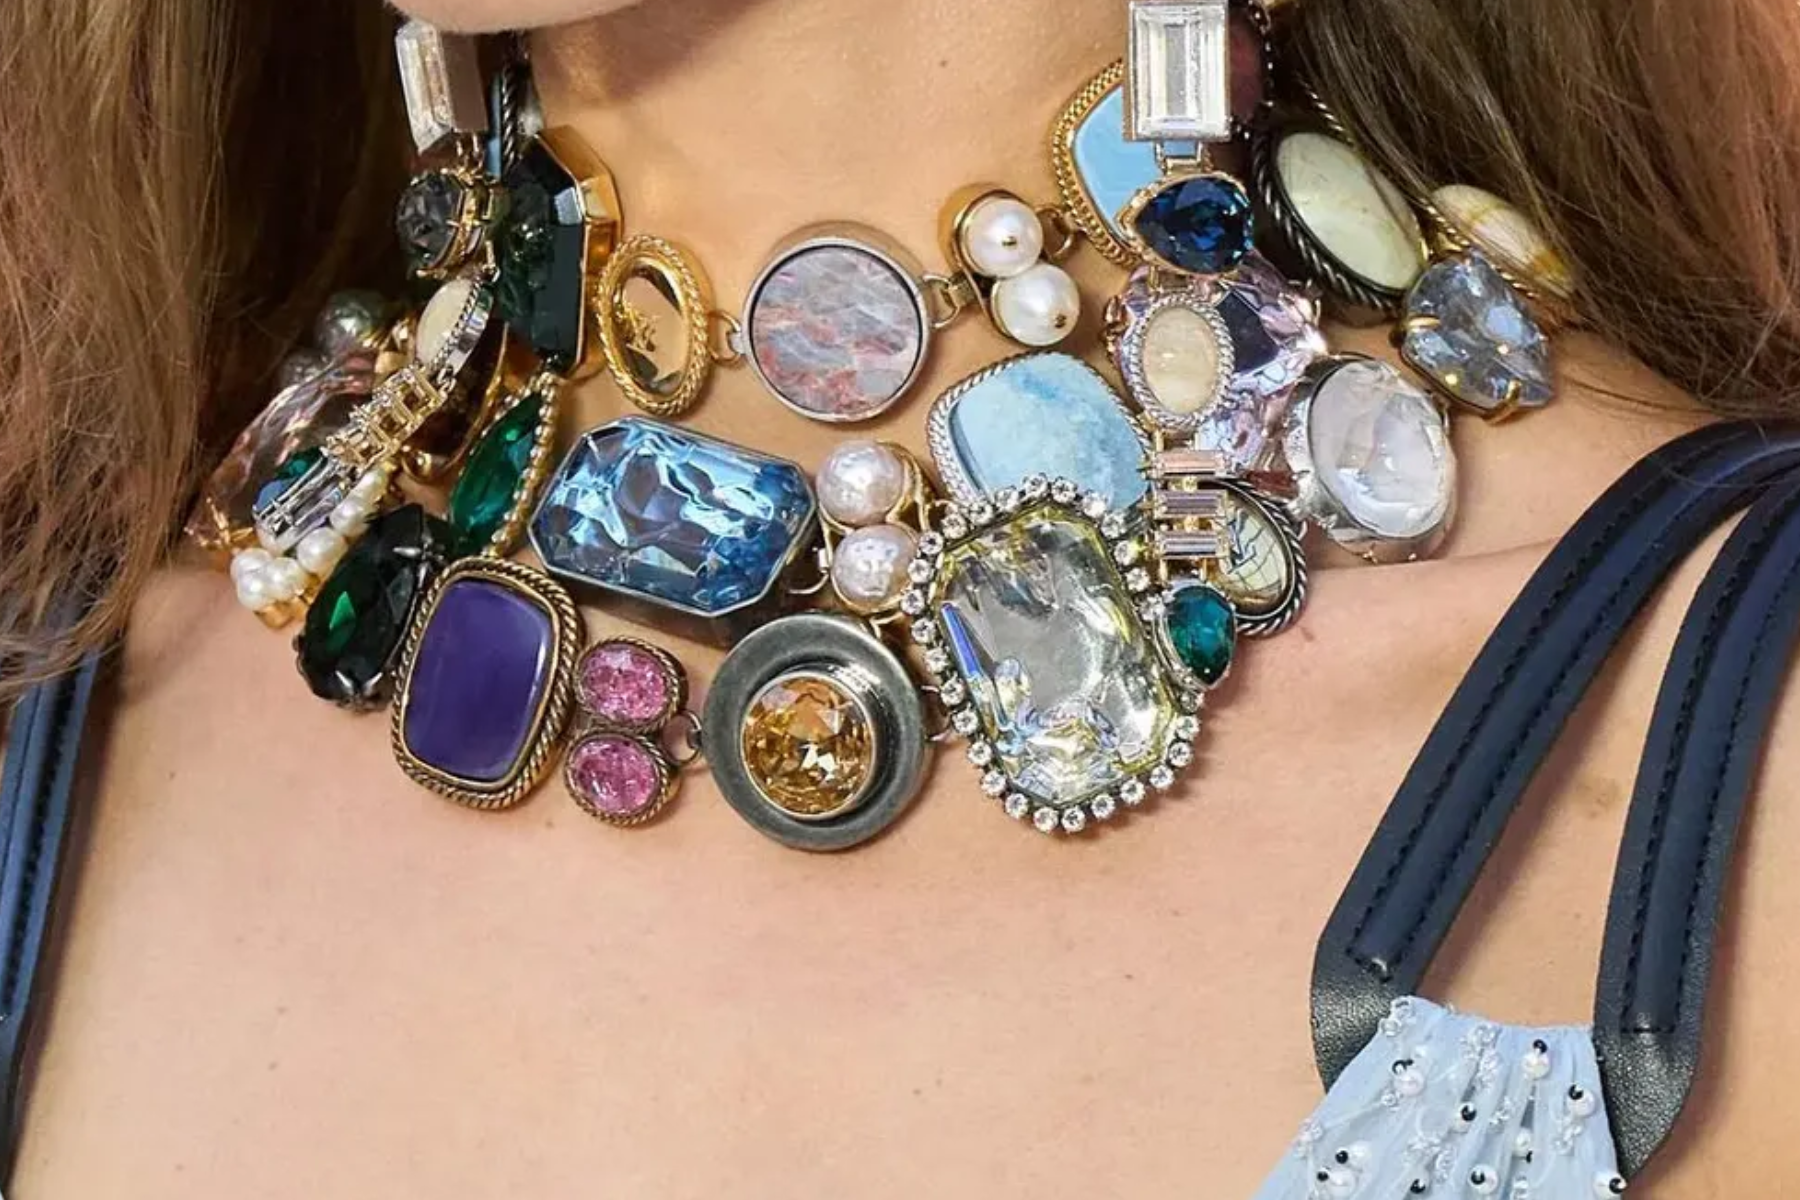 The Role Of Gemstones In Fashion And Jewelry Trends - Runways To Red Carpets